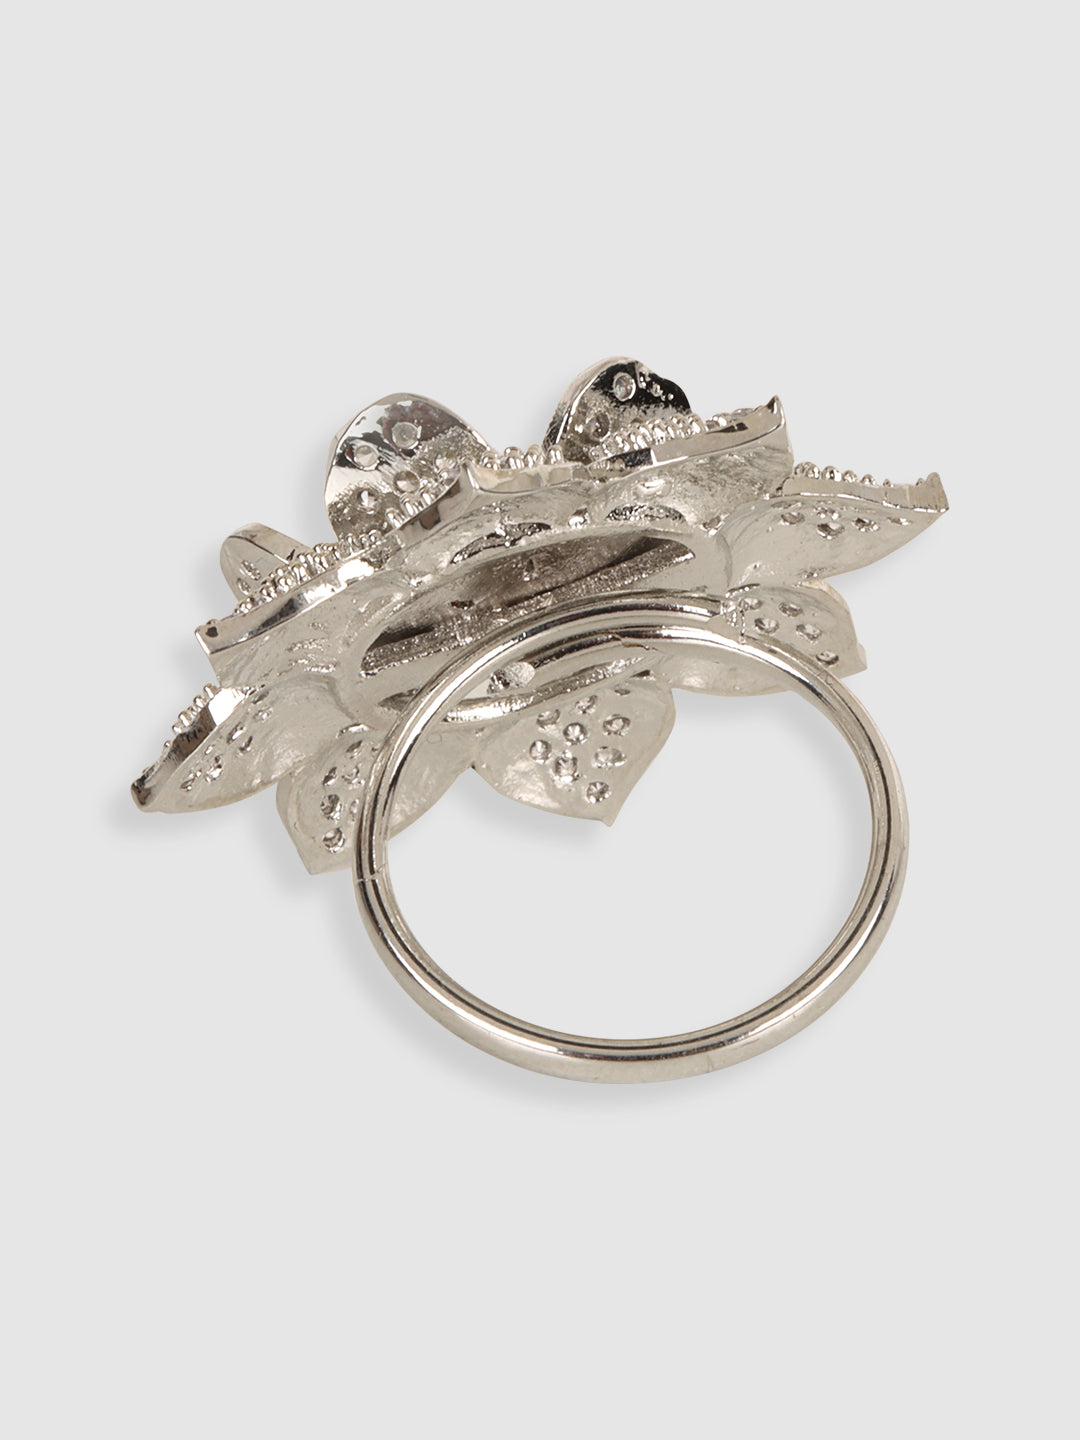 Rhodium-Plated American Diamonds Studded CocKtail Ring